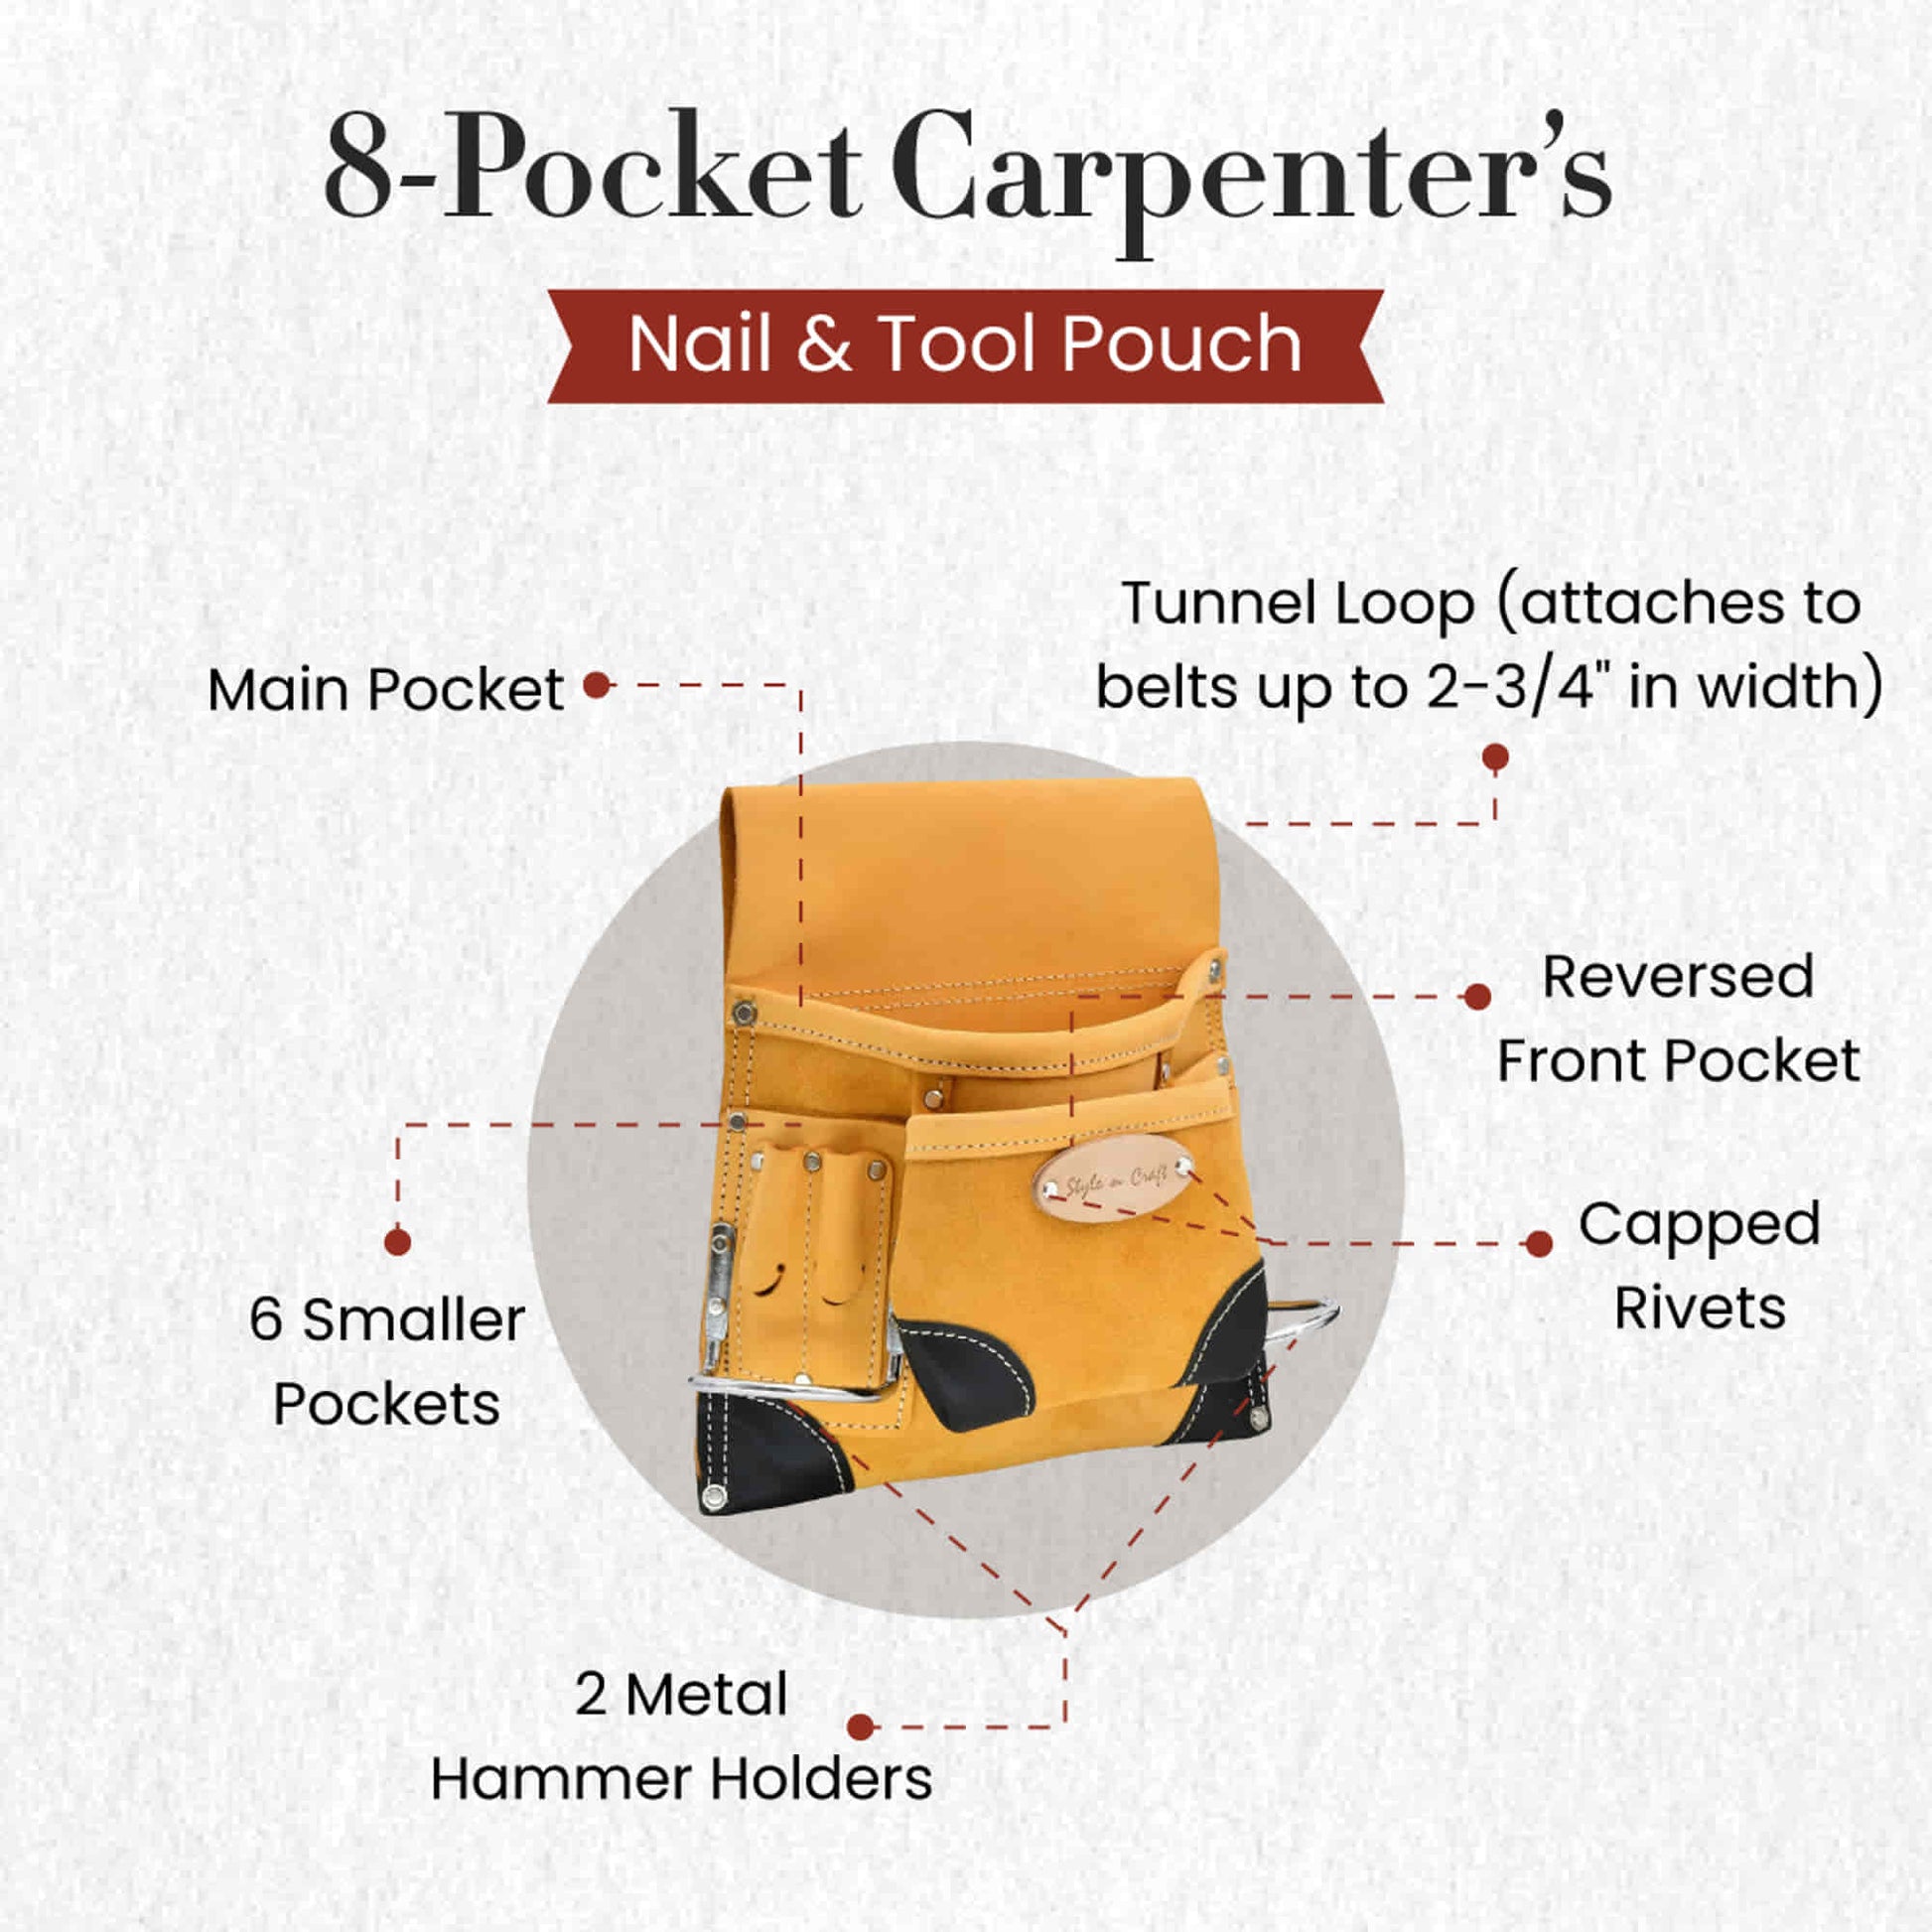 Style n Craft's 93823 - 8 Pocket Carpenter's Nail & Tool Pouch in Yellow Full Grain Leather with Reinforced Corners - Front Angled View Showing the Details